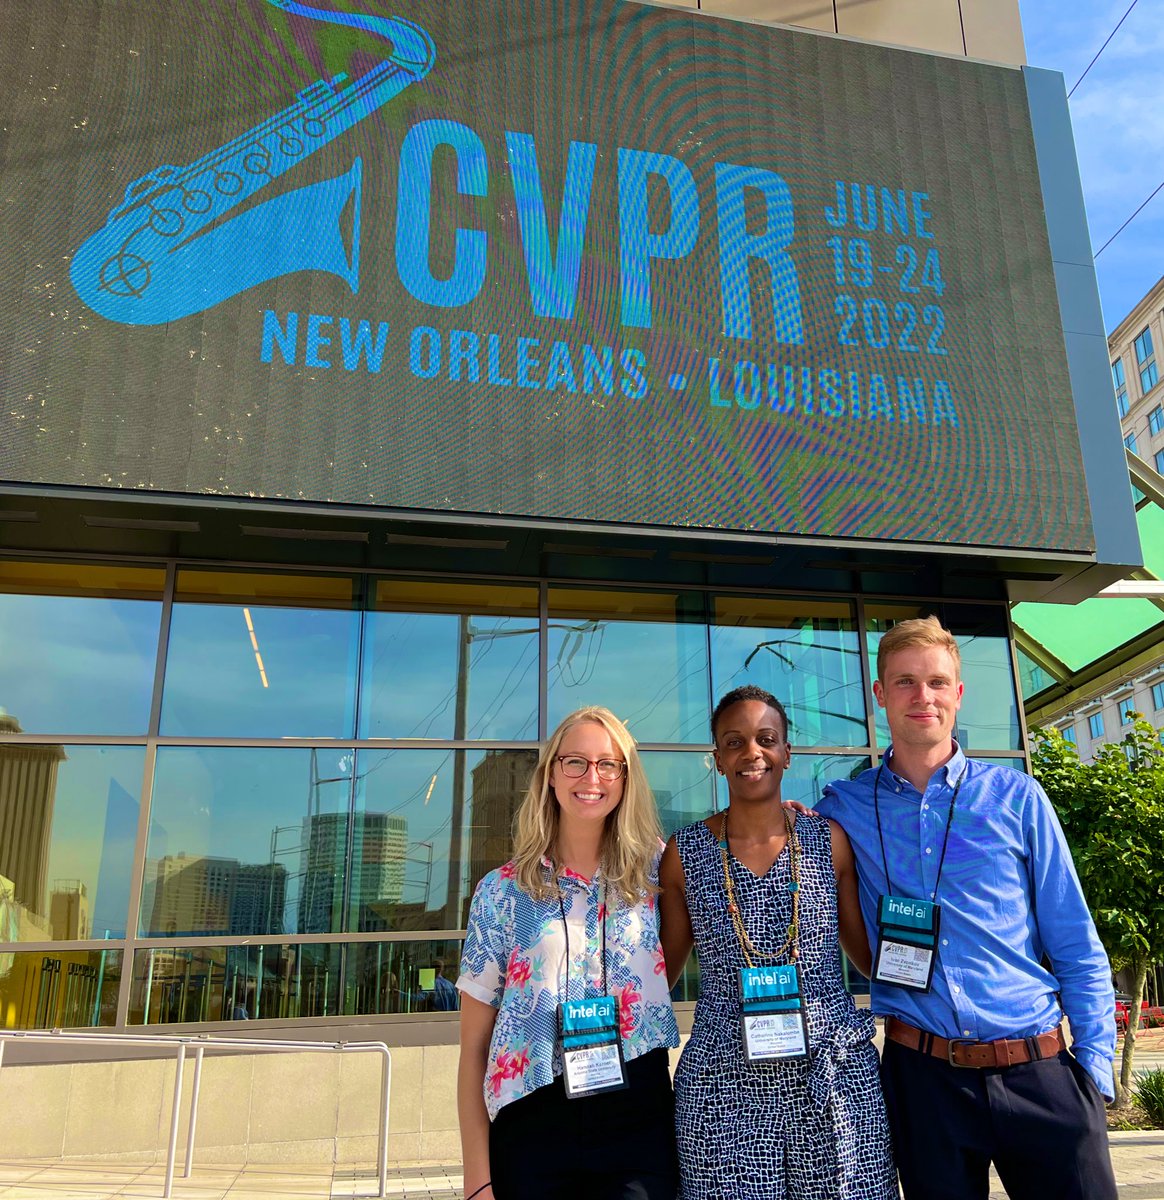 That’s a wrap for our tutorial session on Machine Learning for Remote Sensing Data + Applications in Agriculture and Food Security! Thanks to my awesome co-instructors @CLNakalembe and @_ivanzvonkov and to everyone who participated. #CVPR2022